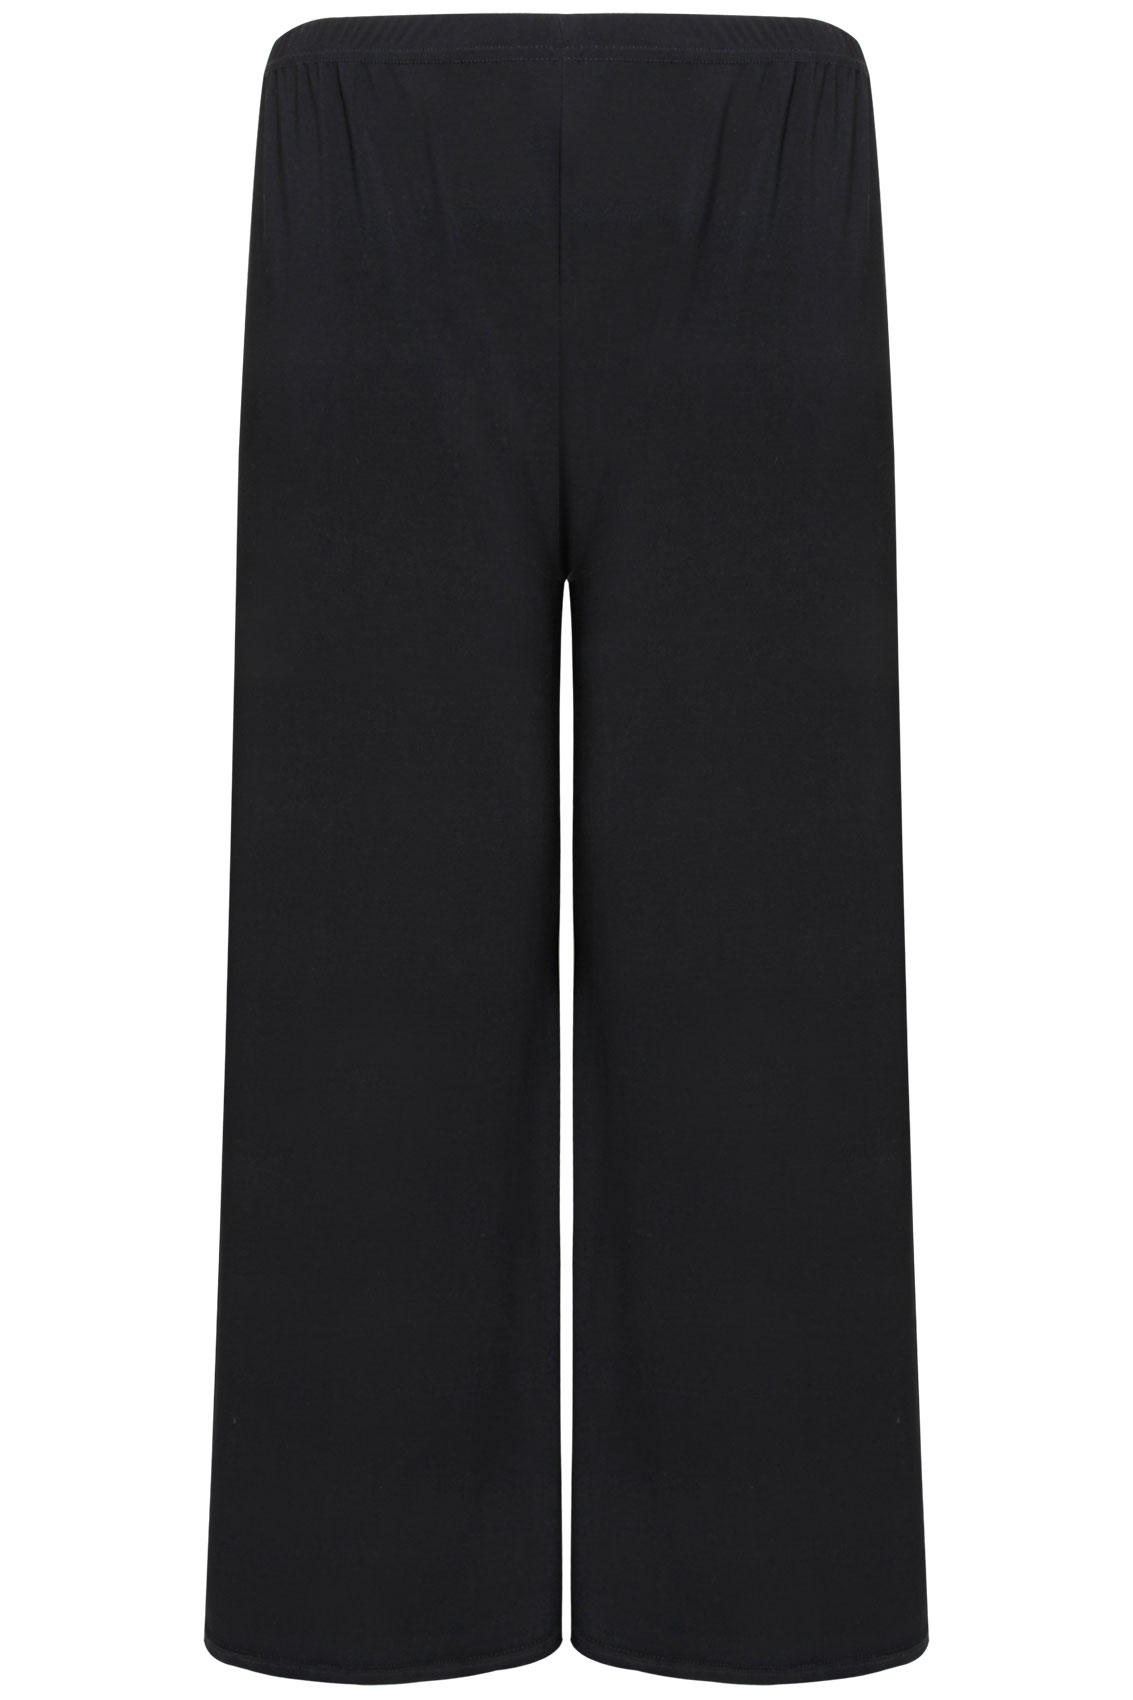 Black Wide Leg Pull On Palazzo Trousers With Elasticated Waist Plus Size 16 18 20 22 24 26 28 30 32